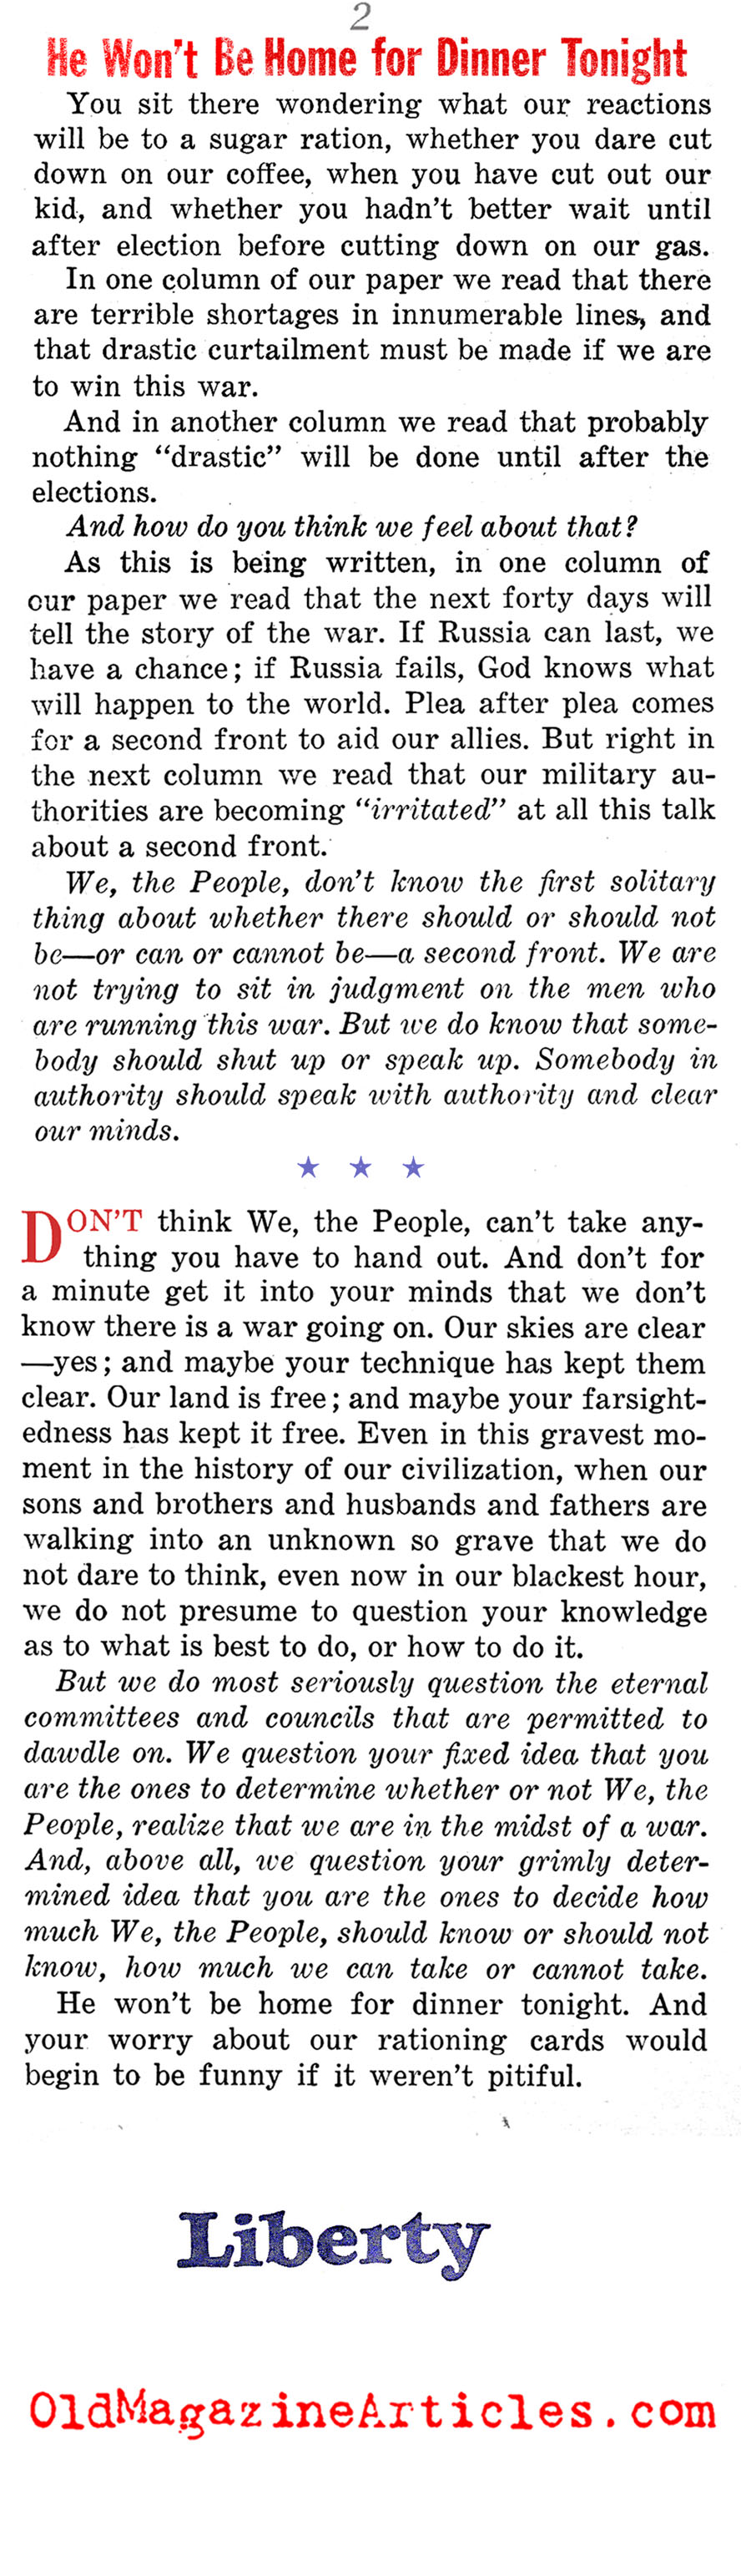 Yes, We Know There's a War On (Liberty Magazine, 1942)